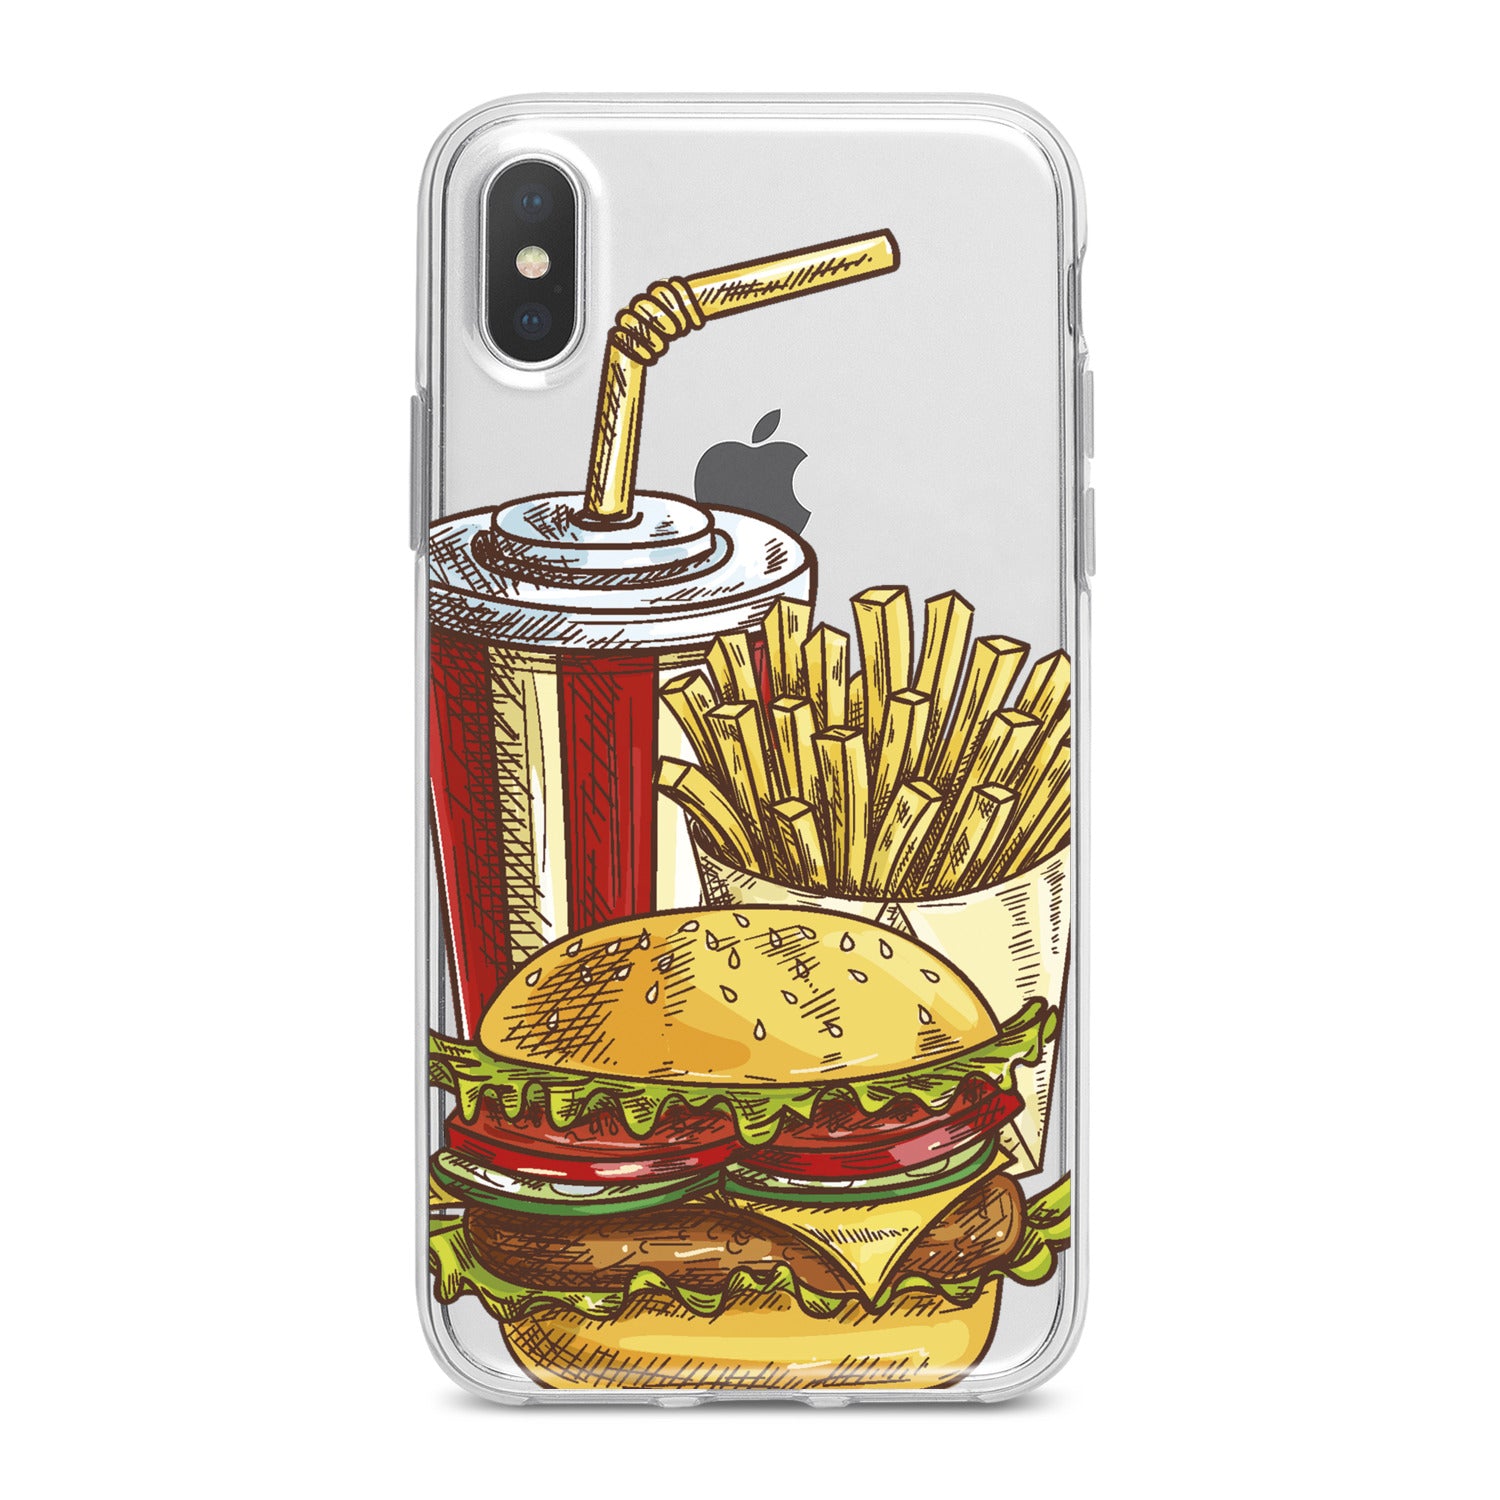 Lex Altern Tasty Burger Phone Case for your iPhone & Android phone.